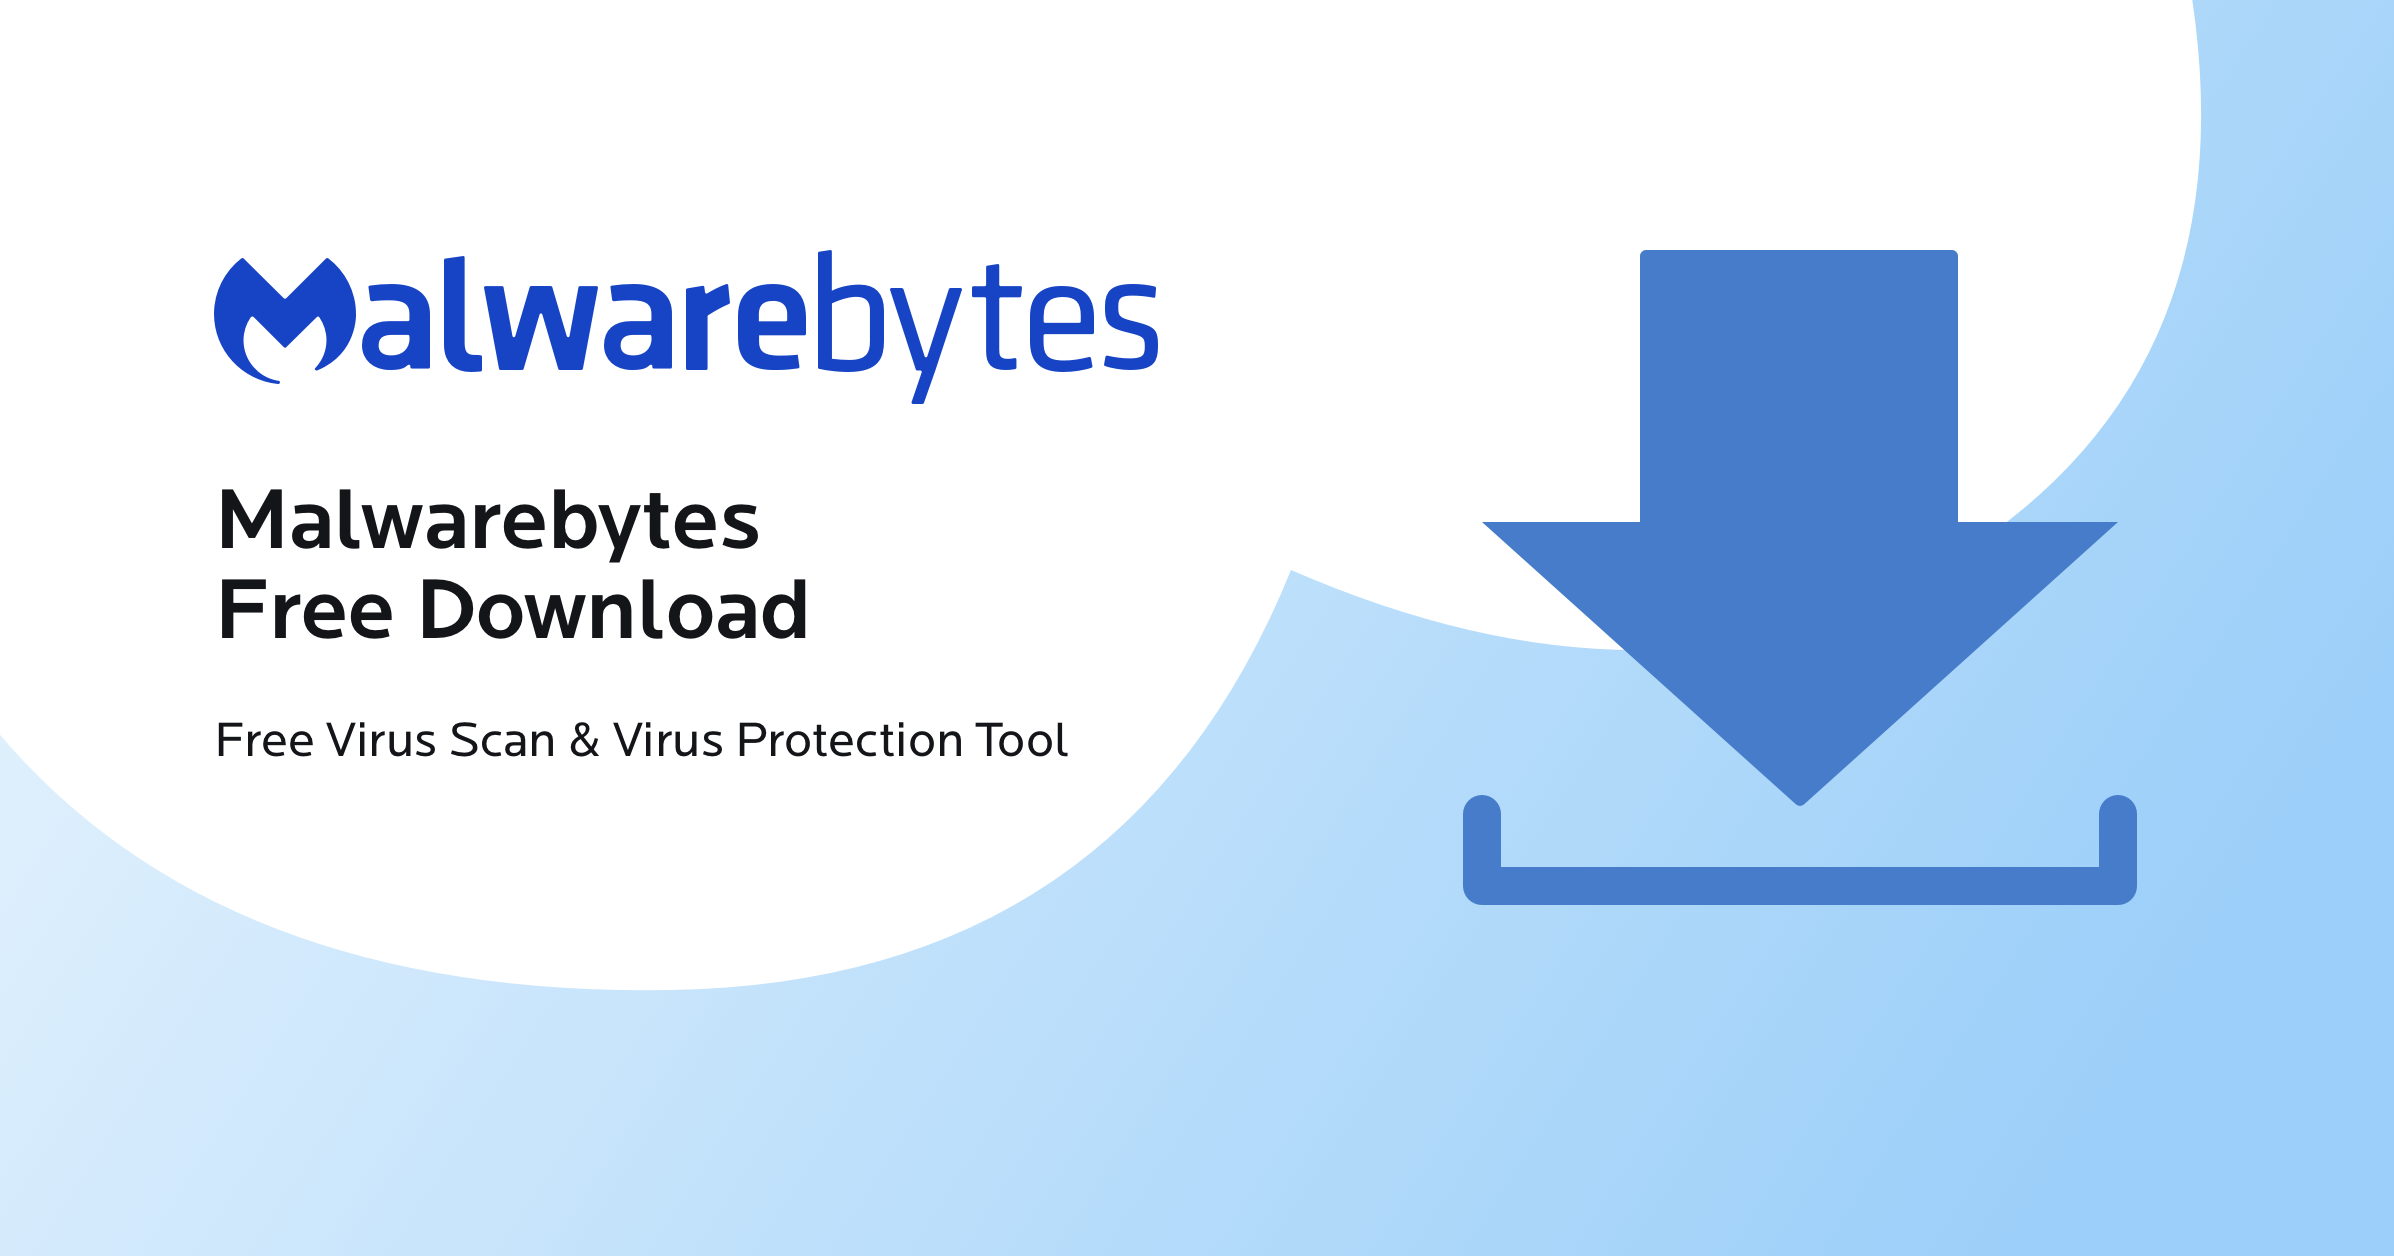 Download and install a reputable anti-malware software.
Run a full system scan to detect and remove any malicious files.